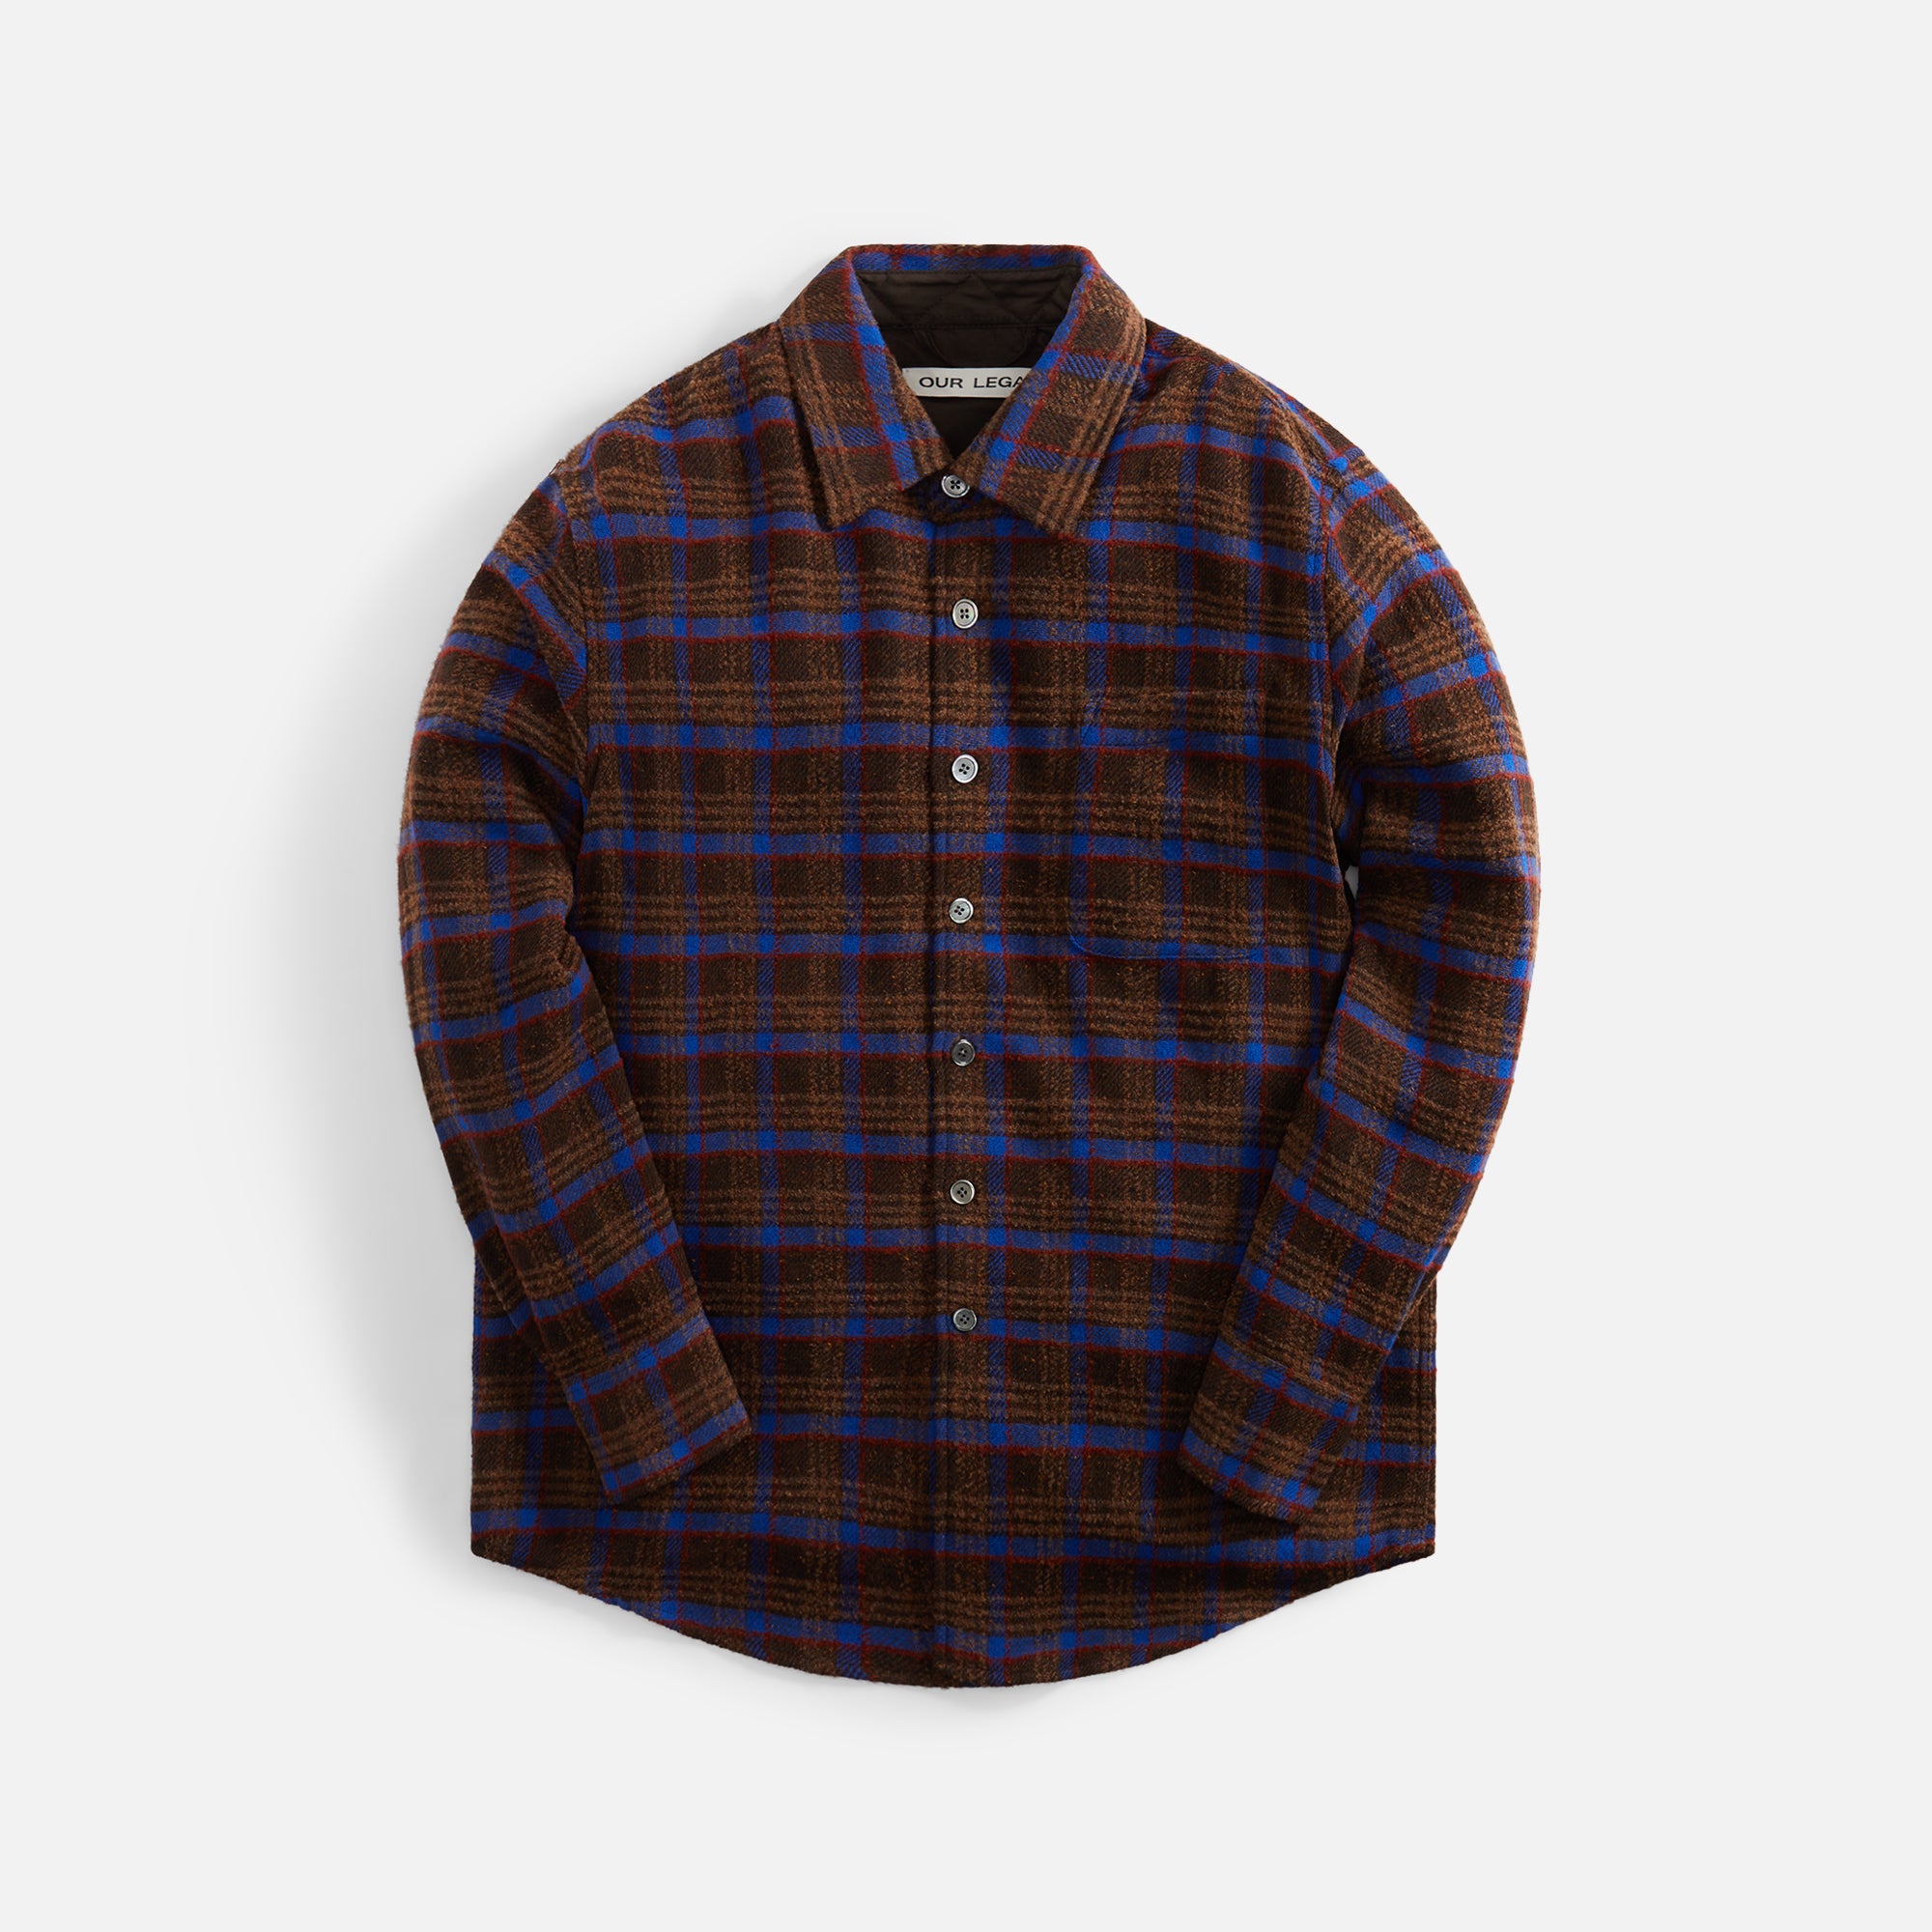 selectの商品最新 23AW OUR LEGACY OVER CHECK SHIRT - www.jubilerkoluszki.pl